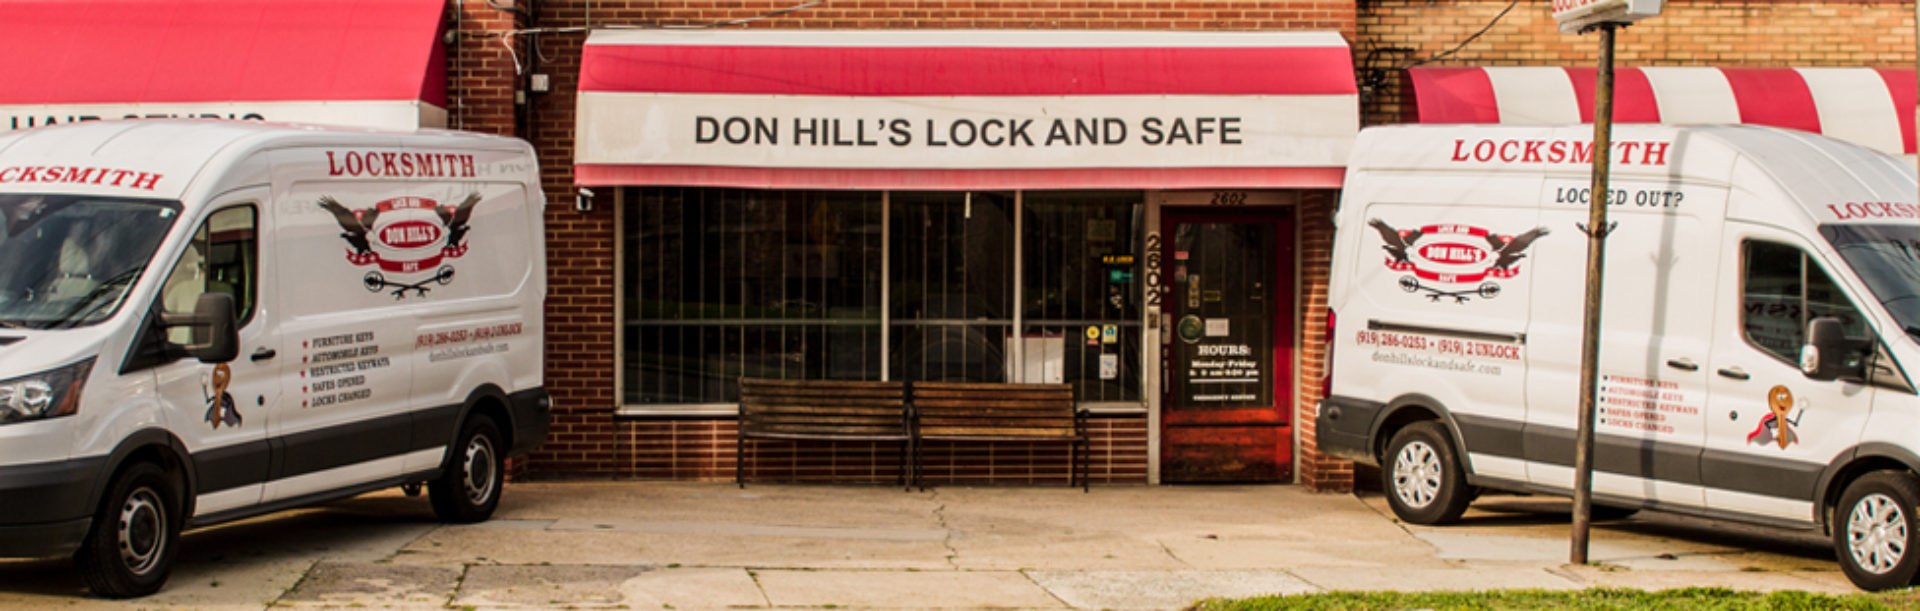 Don Hill's Lock and Safe